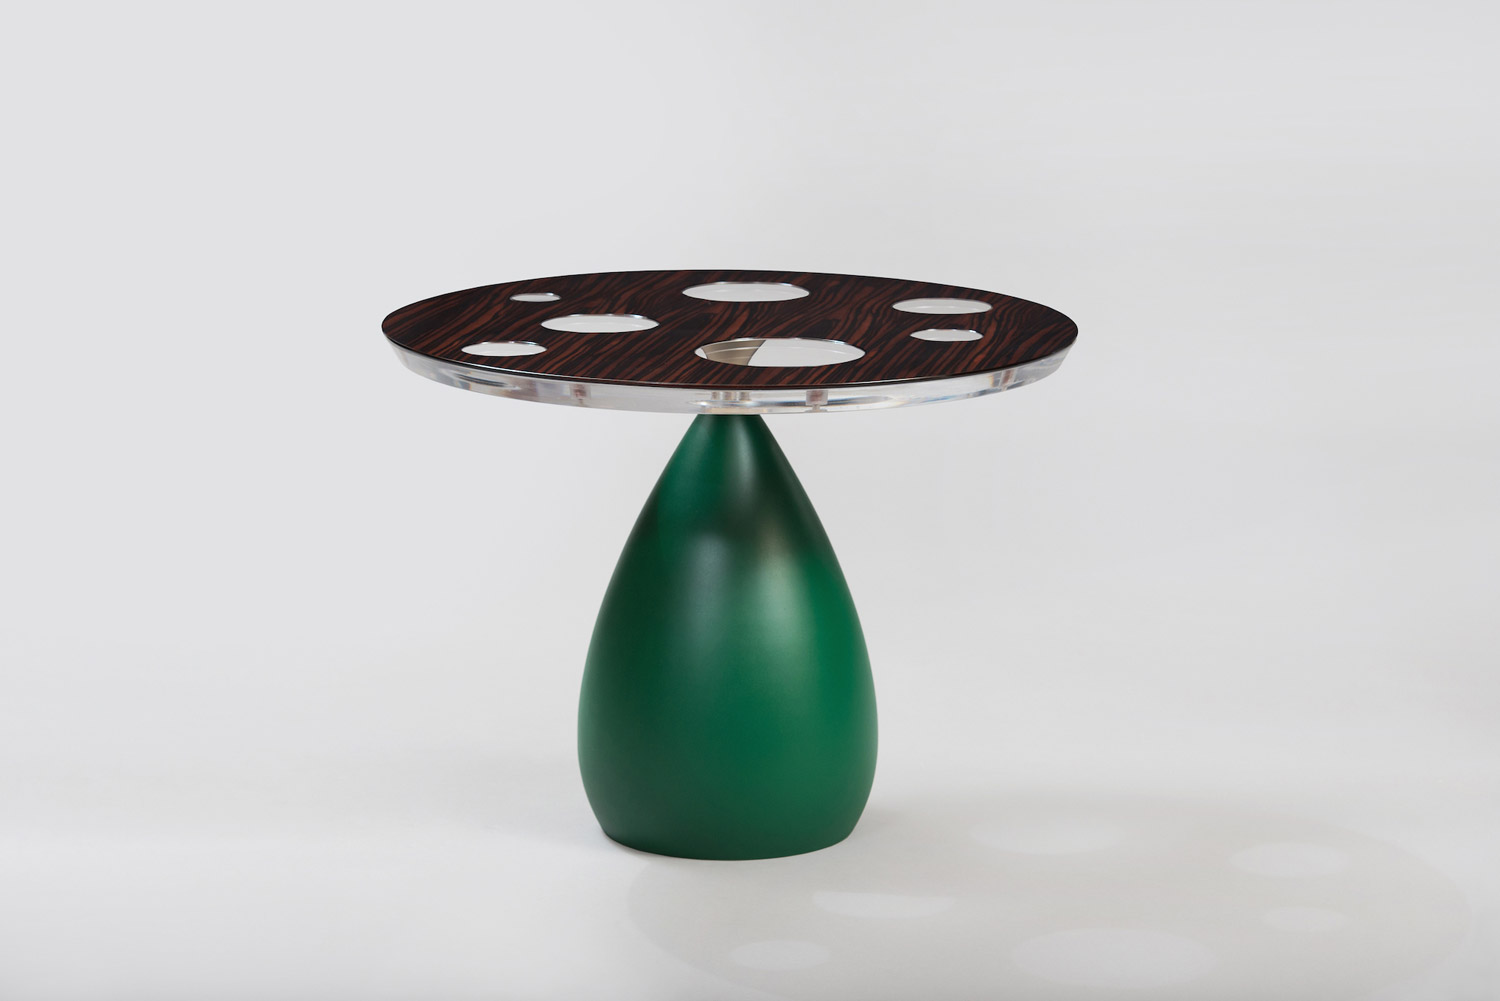 The Seven Planets Occasional Table by Pipim